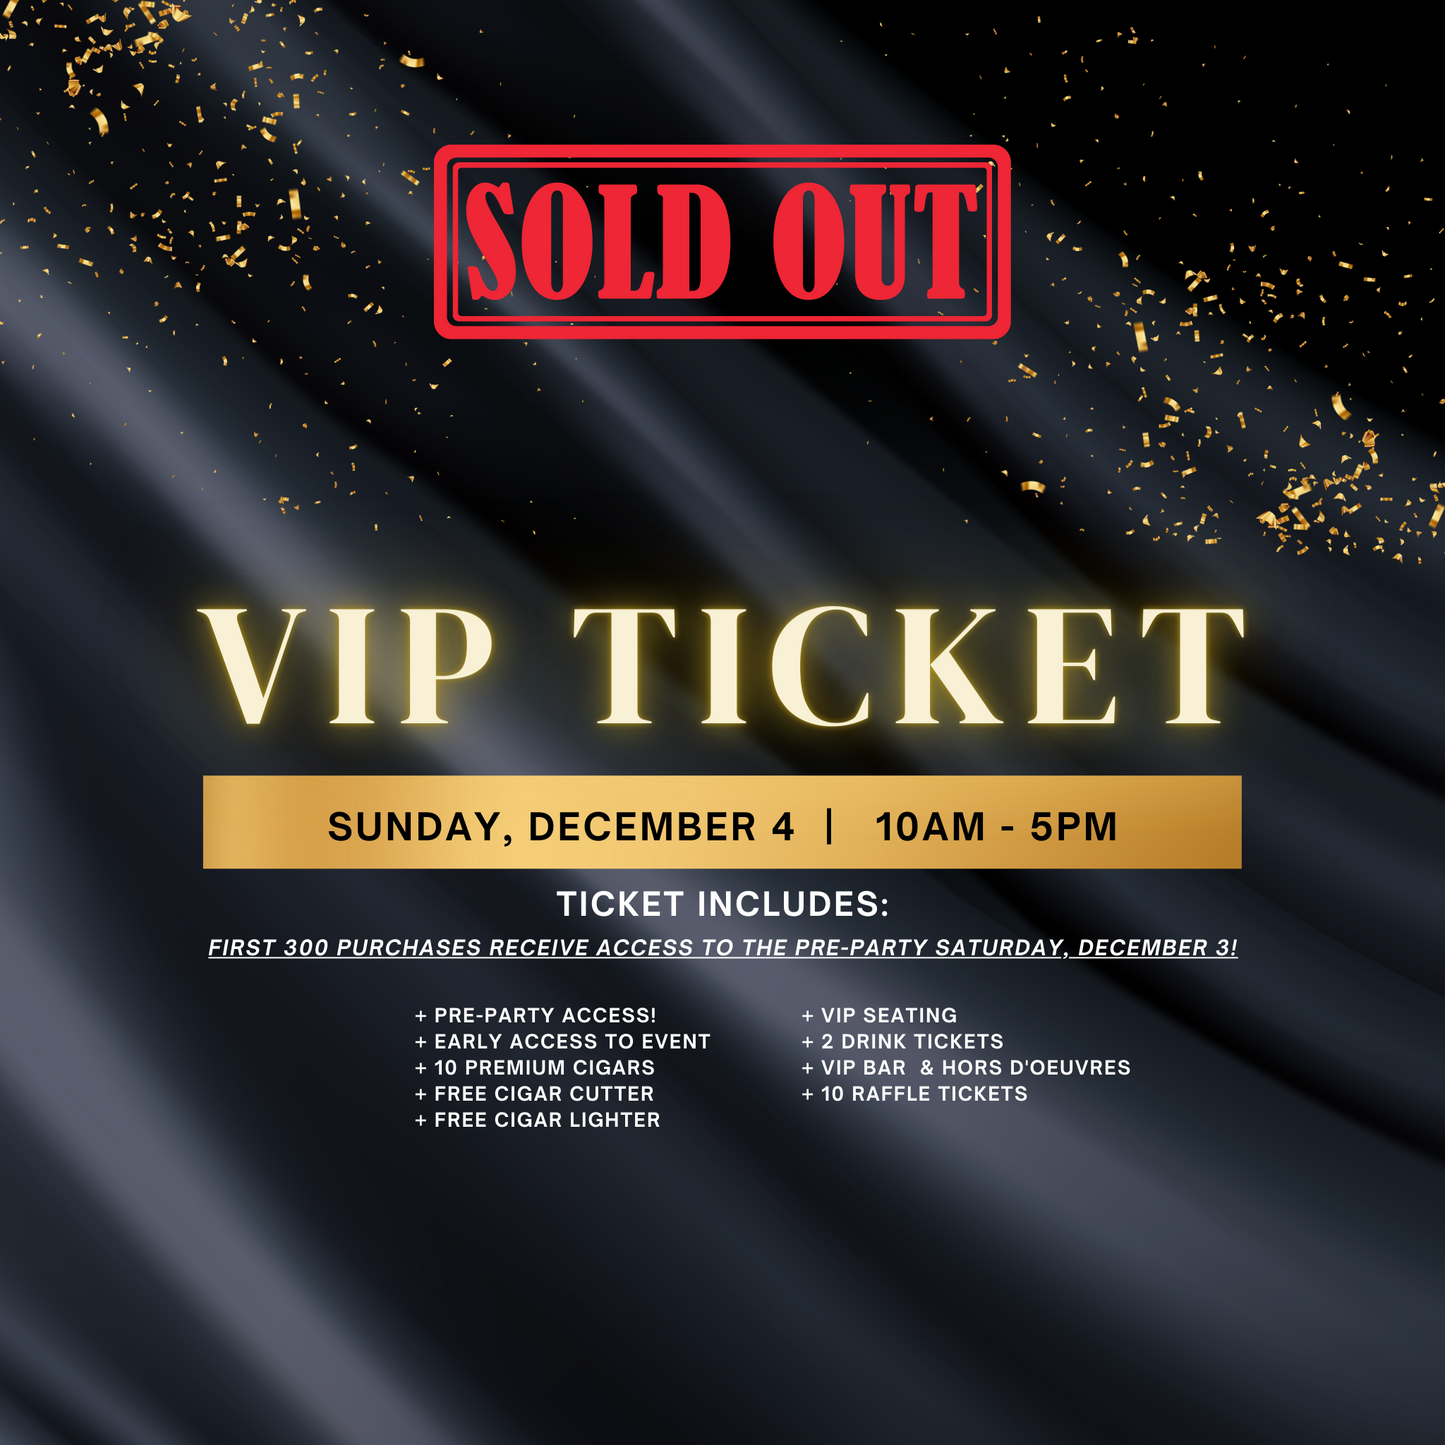 VIP Ticket - With Pre-Party Access